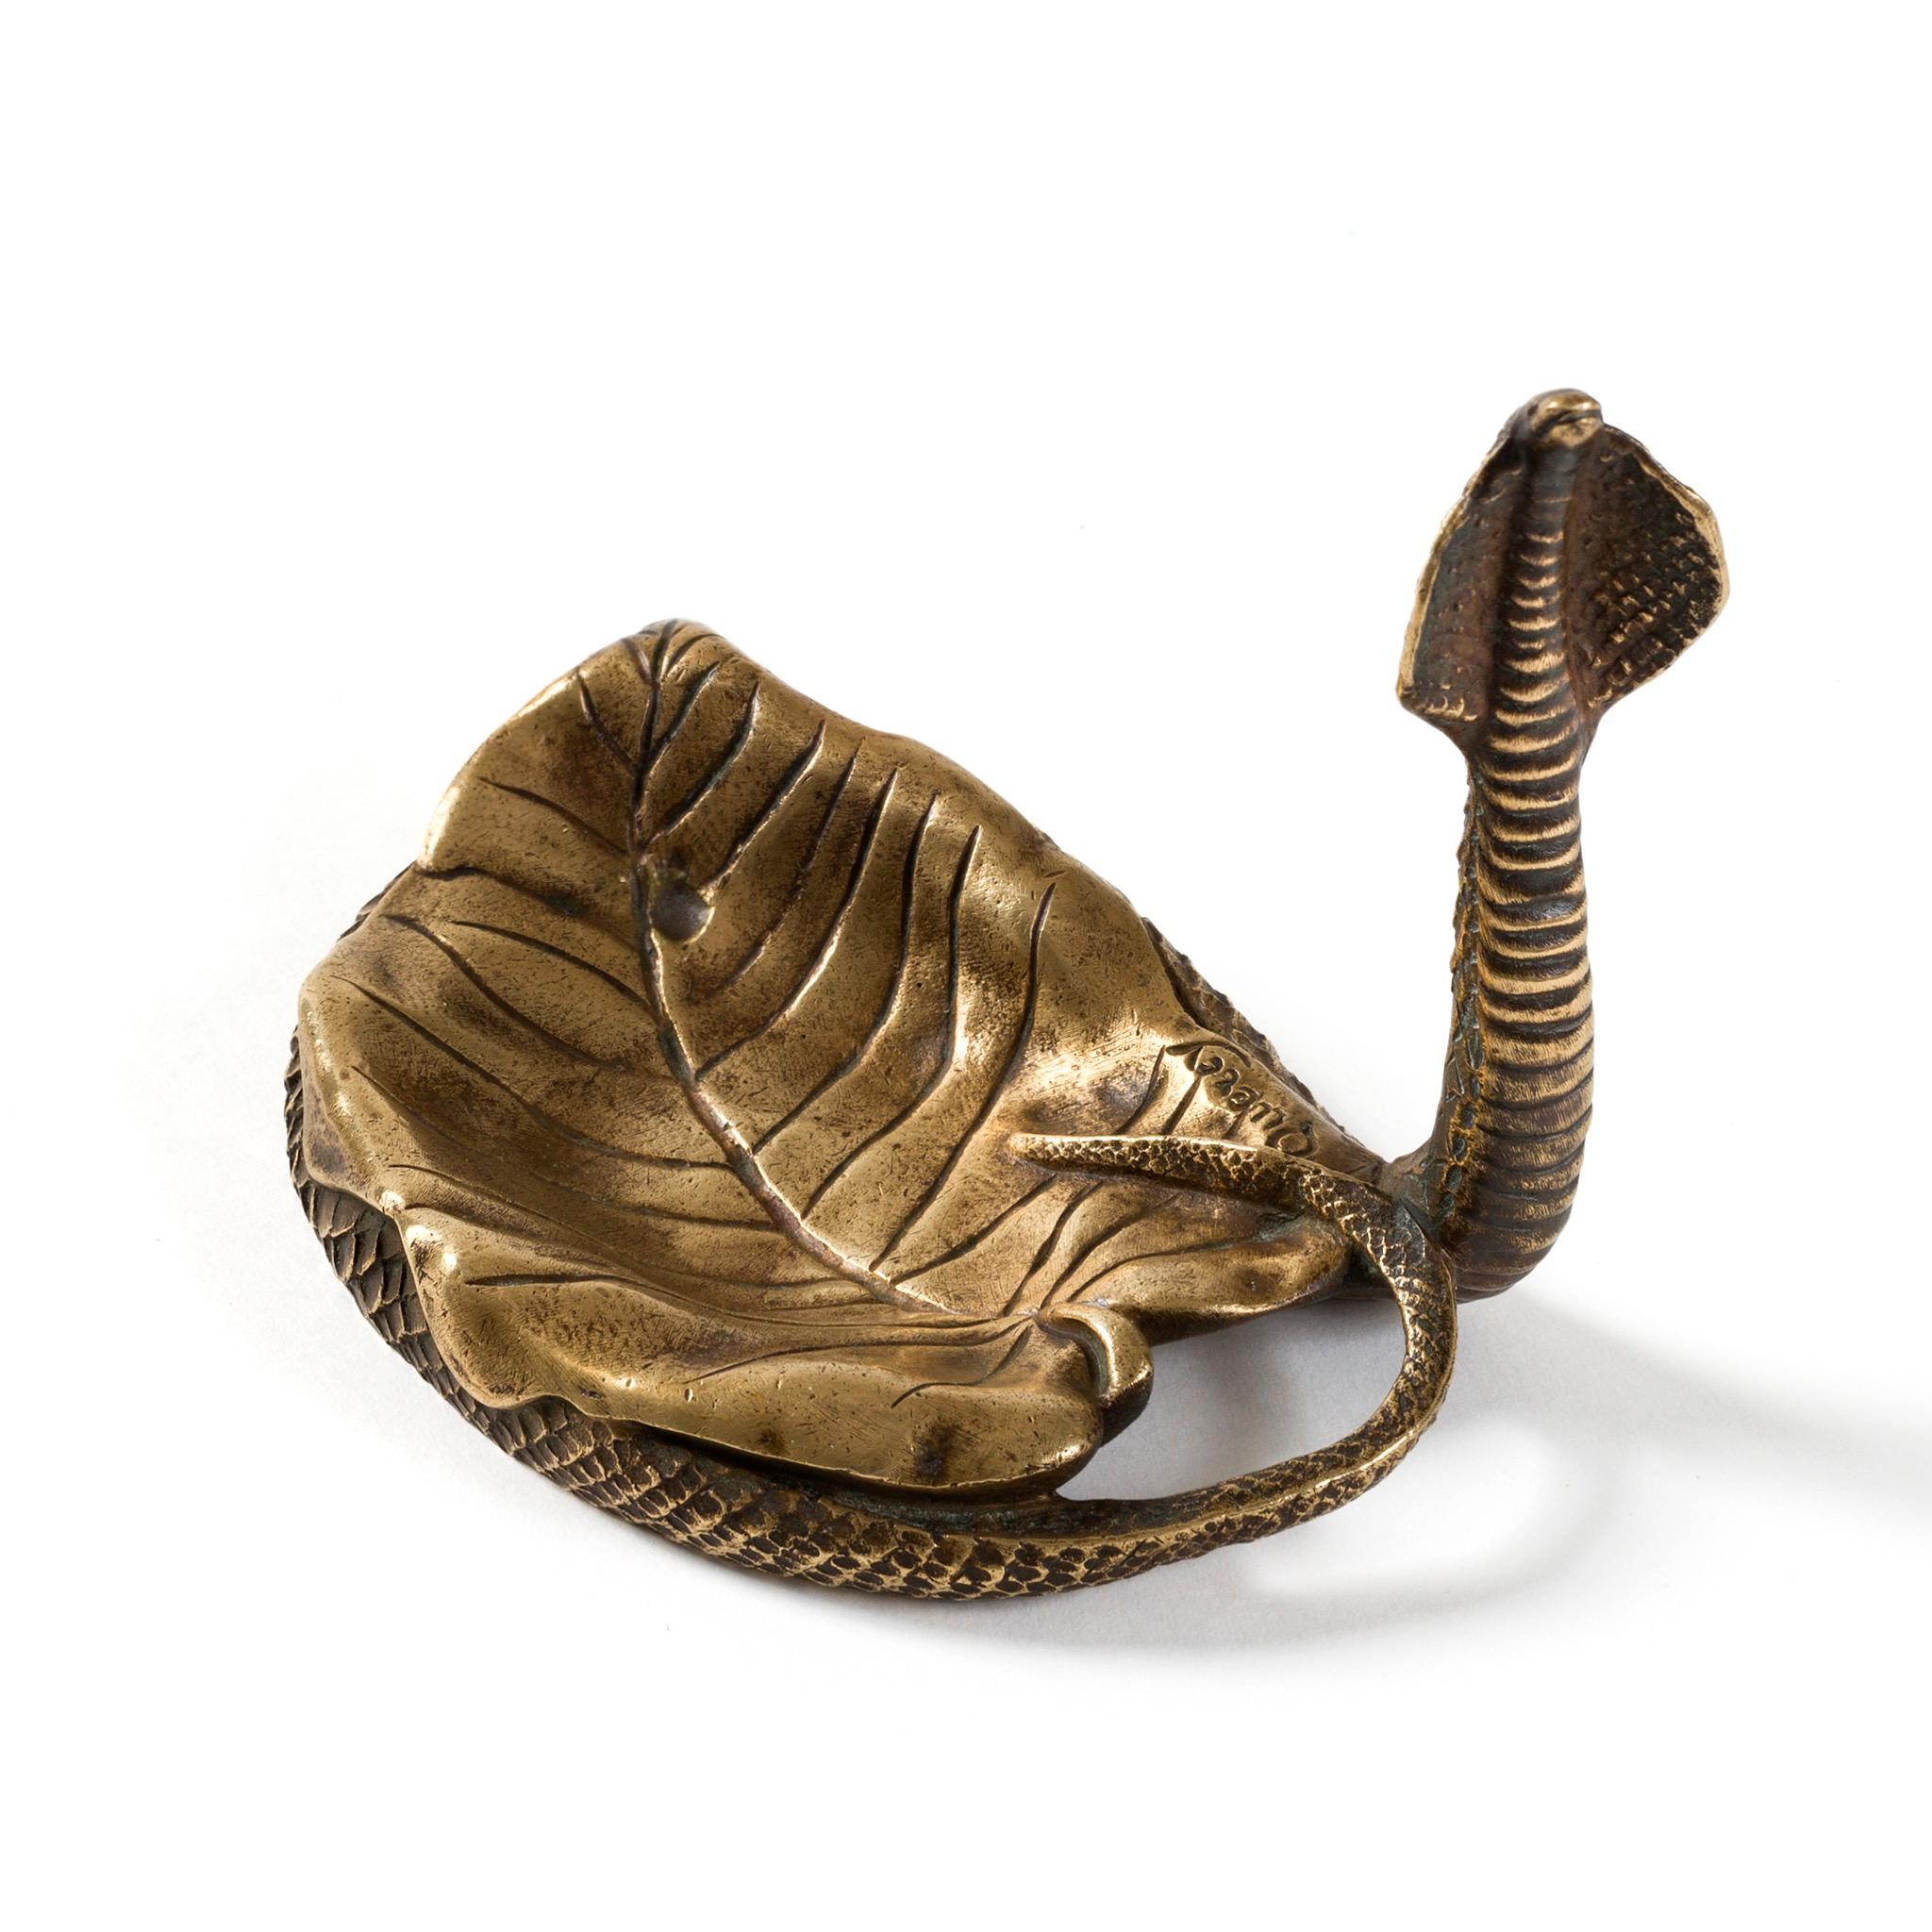 This three piece set made of gilt bronze from the Art Nouveau period is cast in the alluring forms of cobras, frozen in the midst of their mesmerizing dances. Comprised of a glass-lined inkwell, a letter opener, and a pen tray, the desk set features